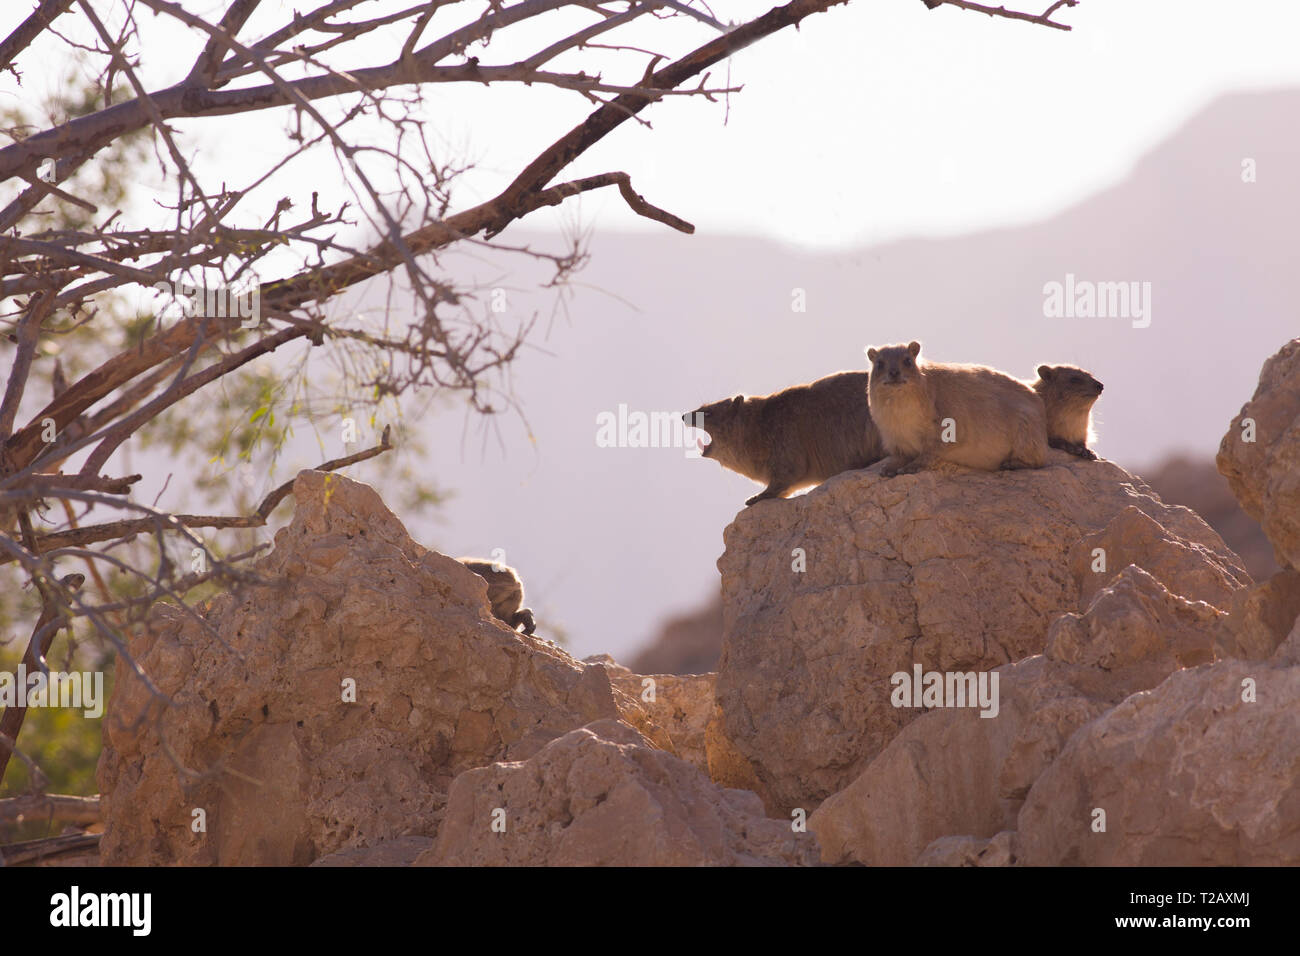 Rock Hyrax, (Procavia capensis). Photographed in Israel, Judean Desert, In January Stock Photo